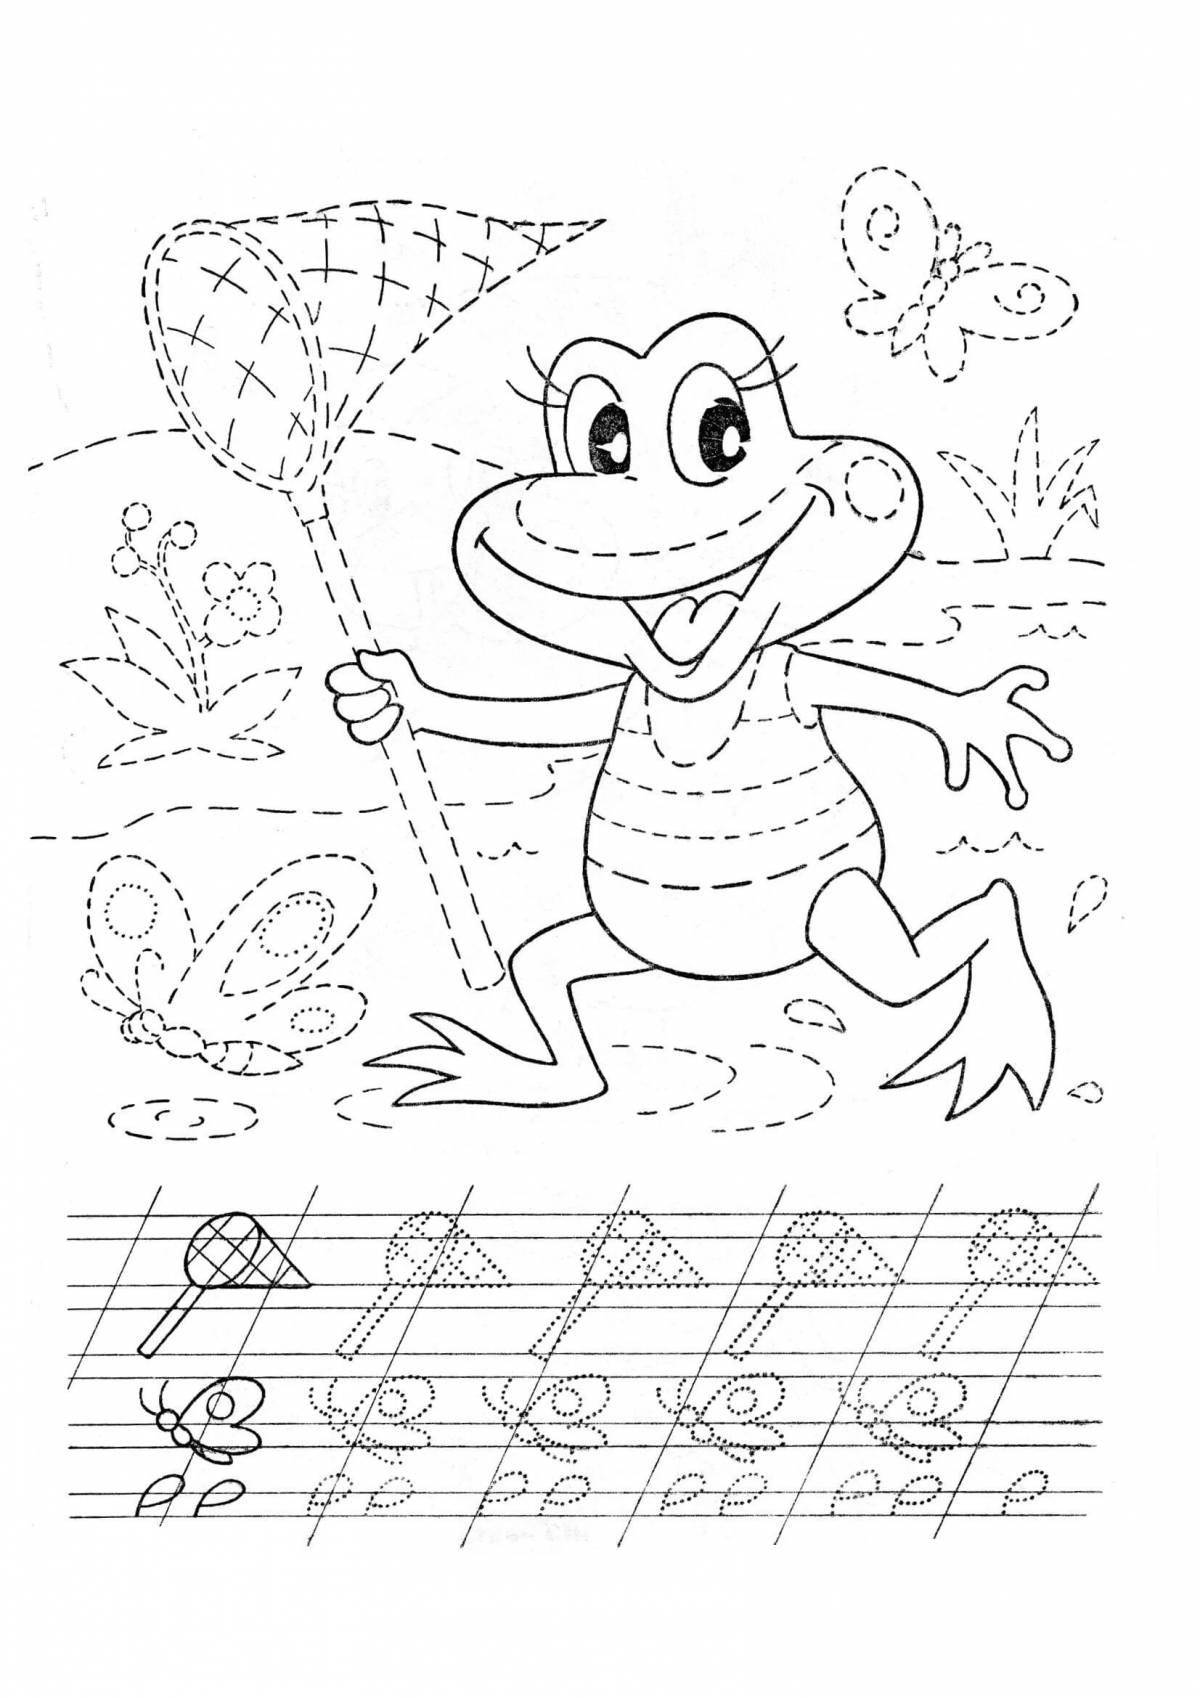 Colorful recipe coloring page for 4-5 year olds